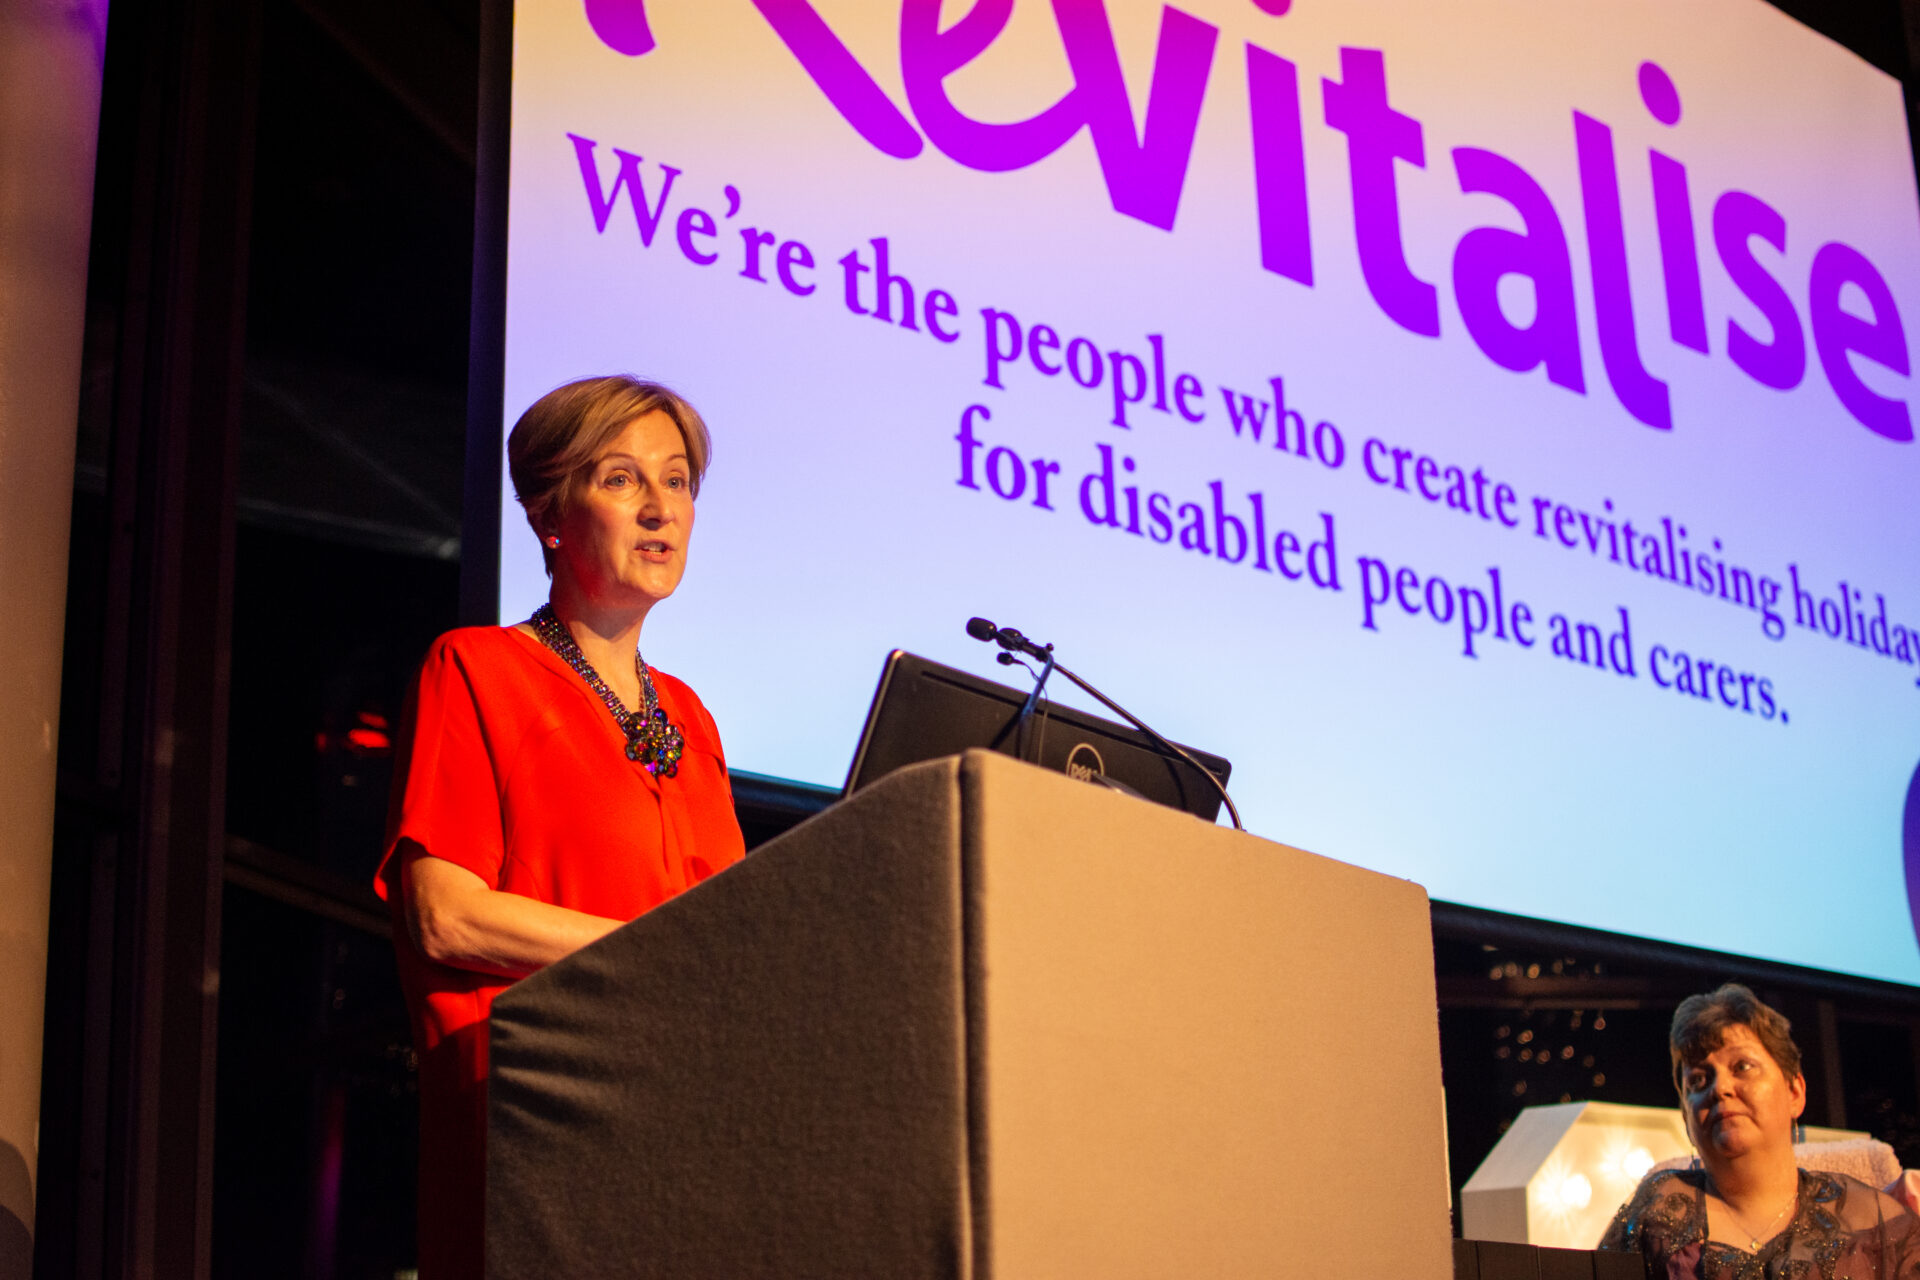 Revitalise CEO Jan Tregelles speaking at an event